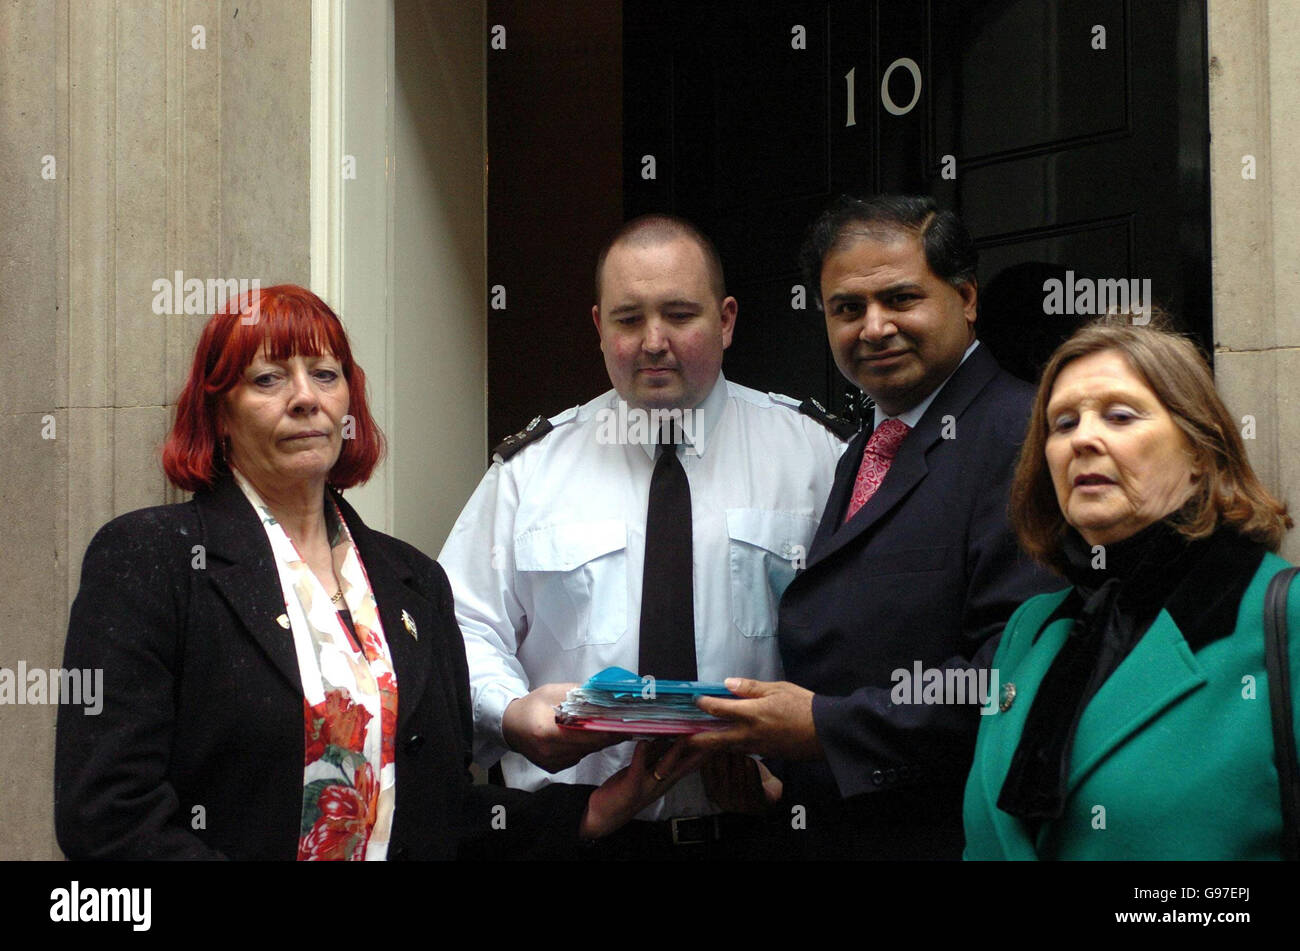 Barbara Dunne (left), from Whinney Banks in Middlesbrough, presents a petition at No 10 Downing Street in central London, Tuesday March 7, 2006, with Ashok Kumar, MP for Middlesbrough South and East Cleveland and Joan McTigue, MP for Middlesbrough. The petition calls for a ban on the selling of dangerous knives on the high street and on the internet and follows the killing of Barabara's son, Robert, after he was attacked with a samurai sword in January 2003. Watch for PA story. PRESS ASSOCIATION PHOTO. Photo credit should read: Johnny Green/PA. Stock Photo